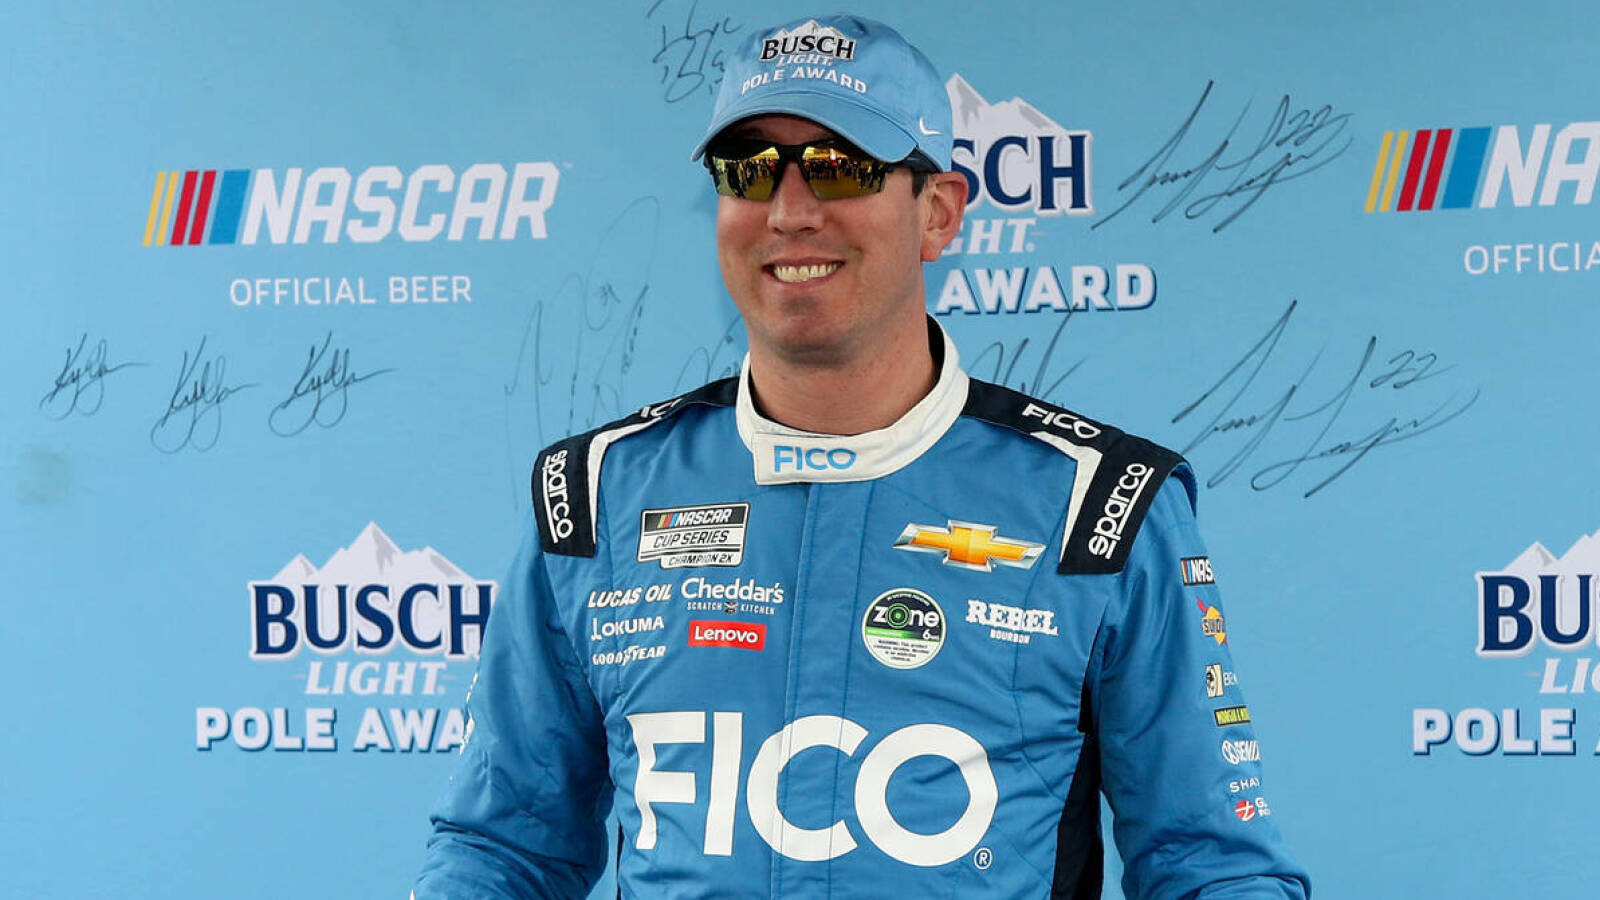 Dover pole could be shot in the arm for struggling Kyle Busch